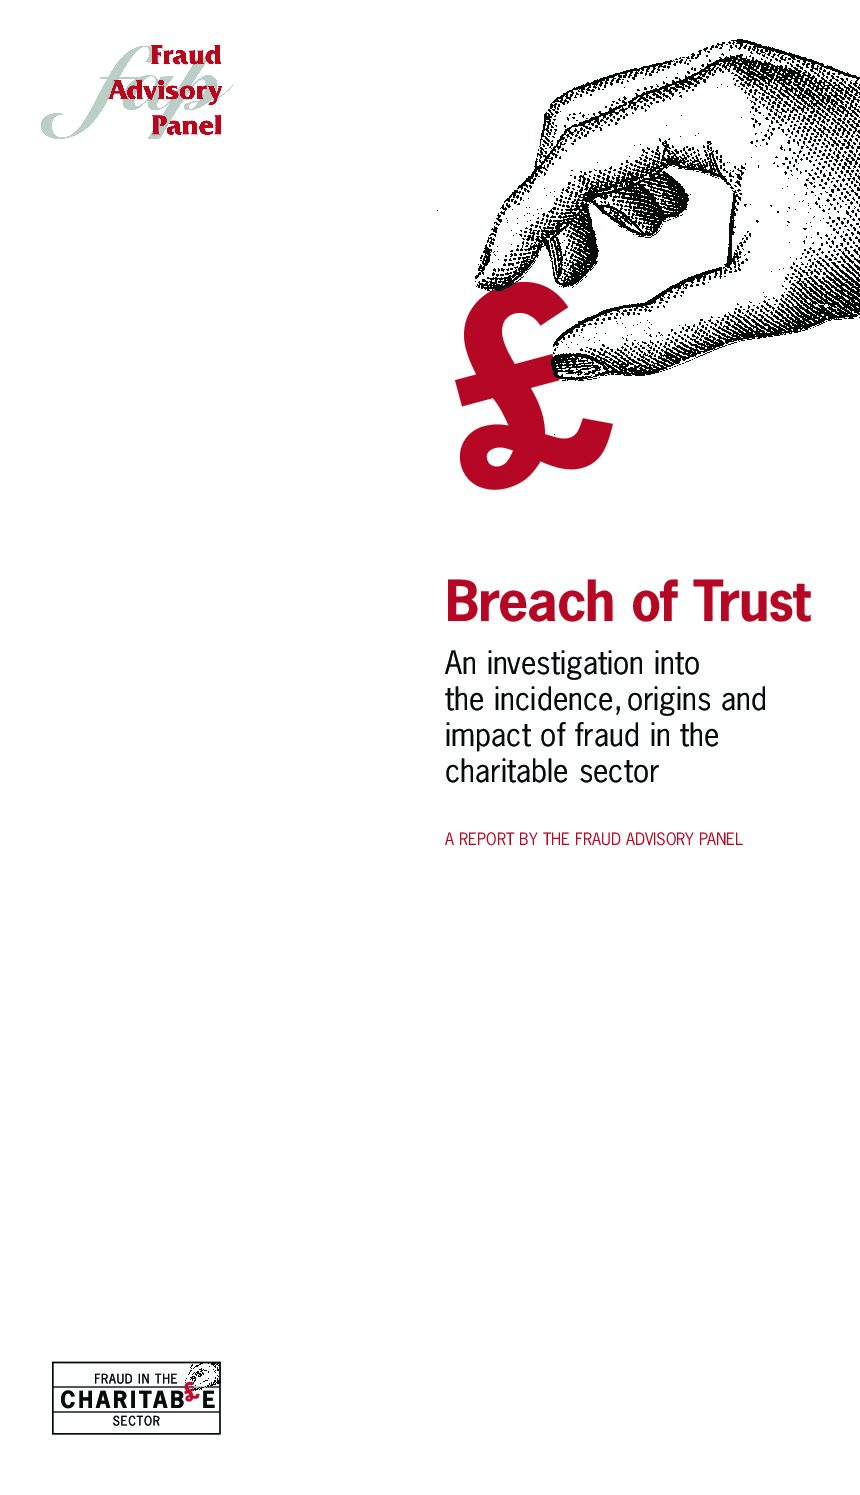 Breach of trust fraud in charitable sector (summary) 2009 document cover